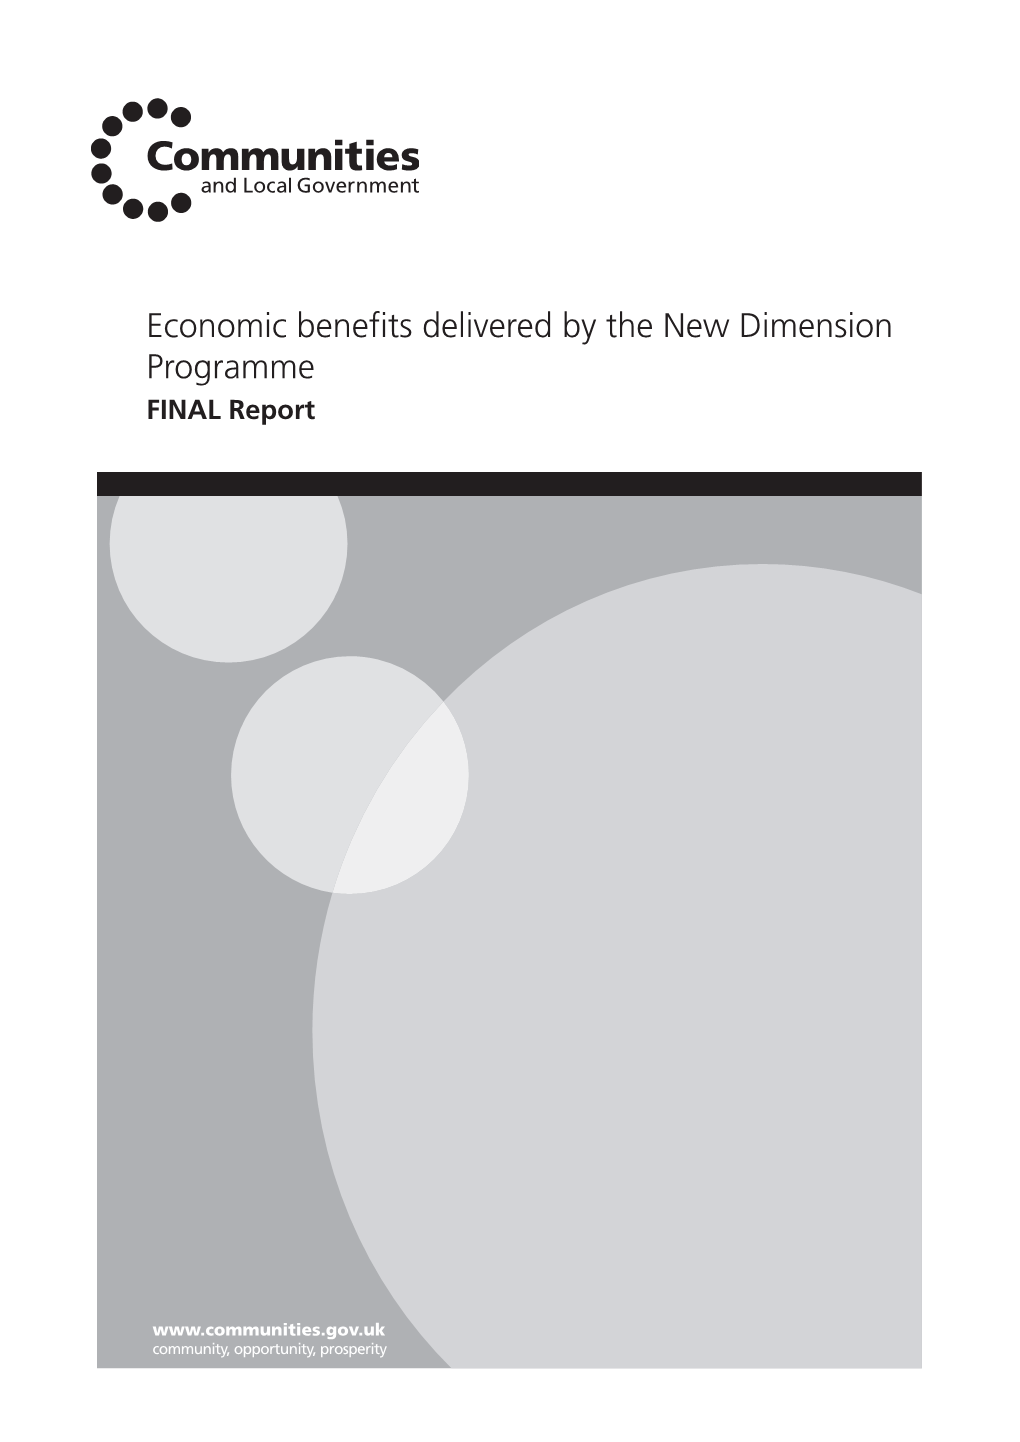 Economic Benefits Delivered by the New Dimension Programme FINAL Report